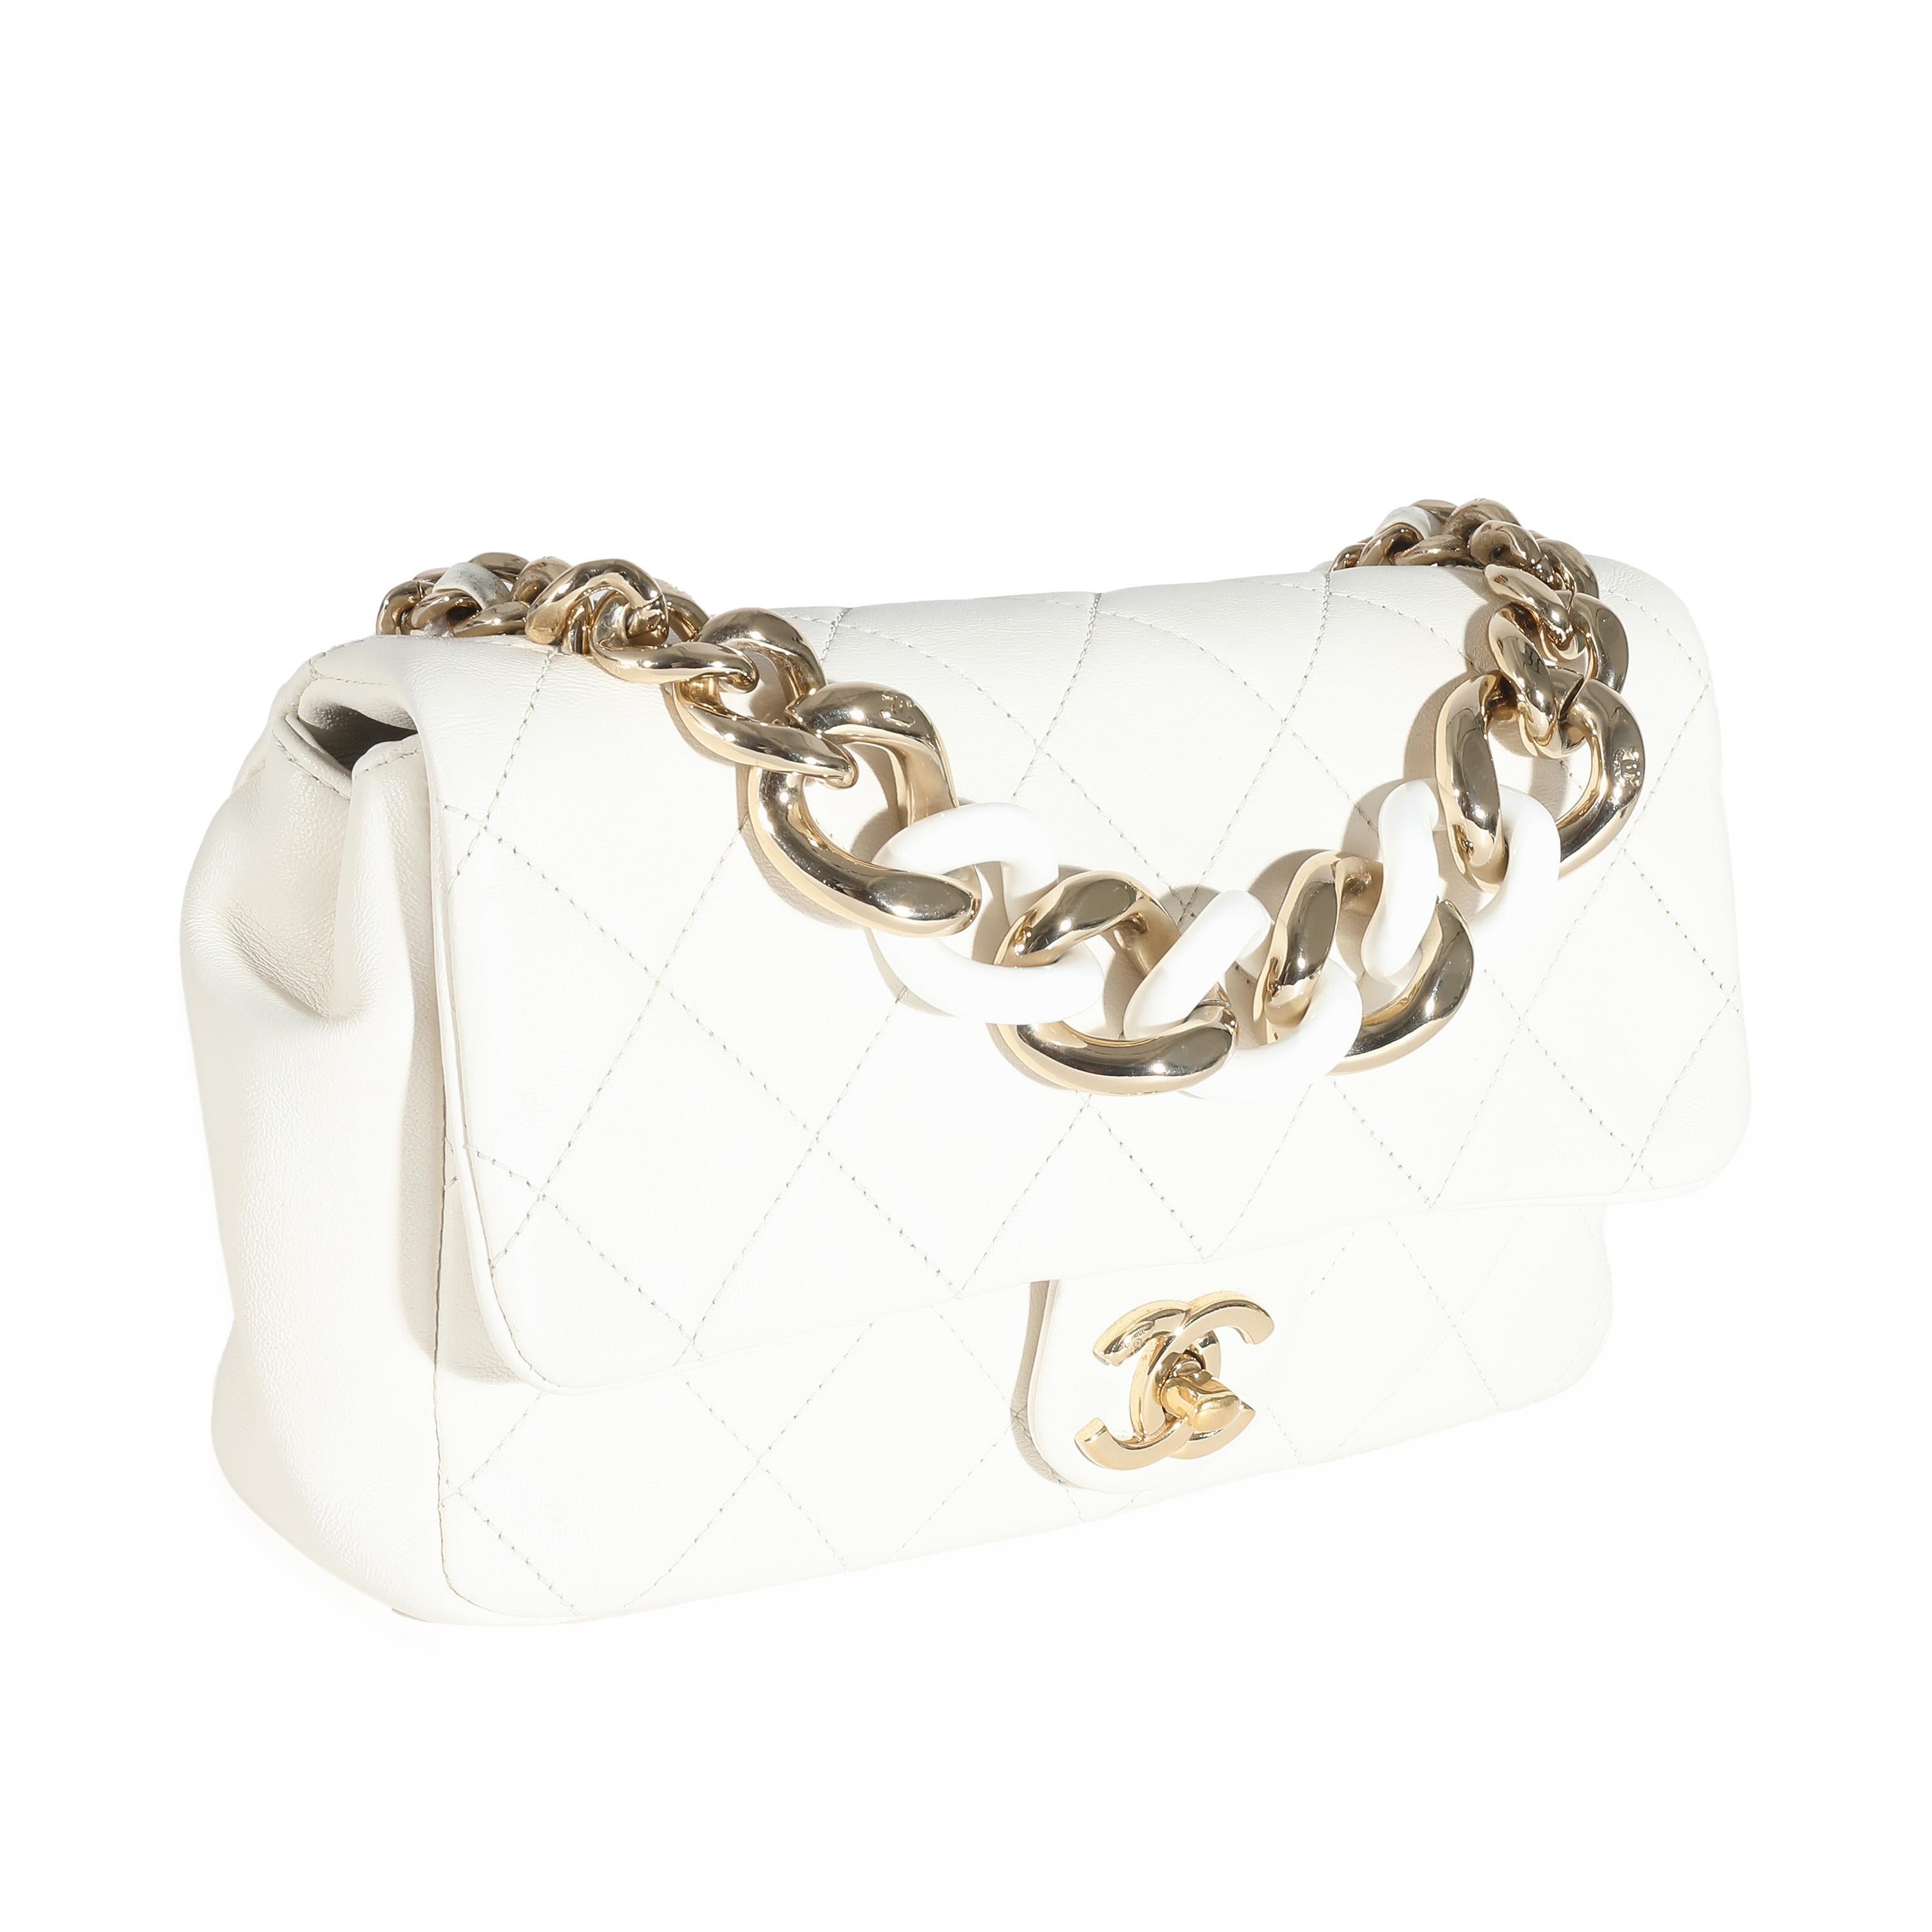 Listing Title: Chanel White Quilted Lambskin Elegant Chain Flap Bag
SKU: 136123
Condition: Pre-owned 
Condition Description: A timeless classic that never goes out of style, the flap bag from Chanel dates back to 1955 and has seen a number of